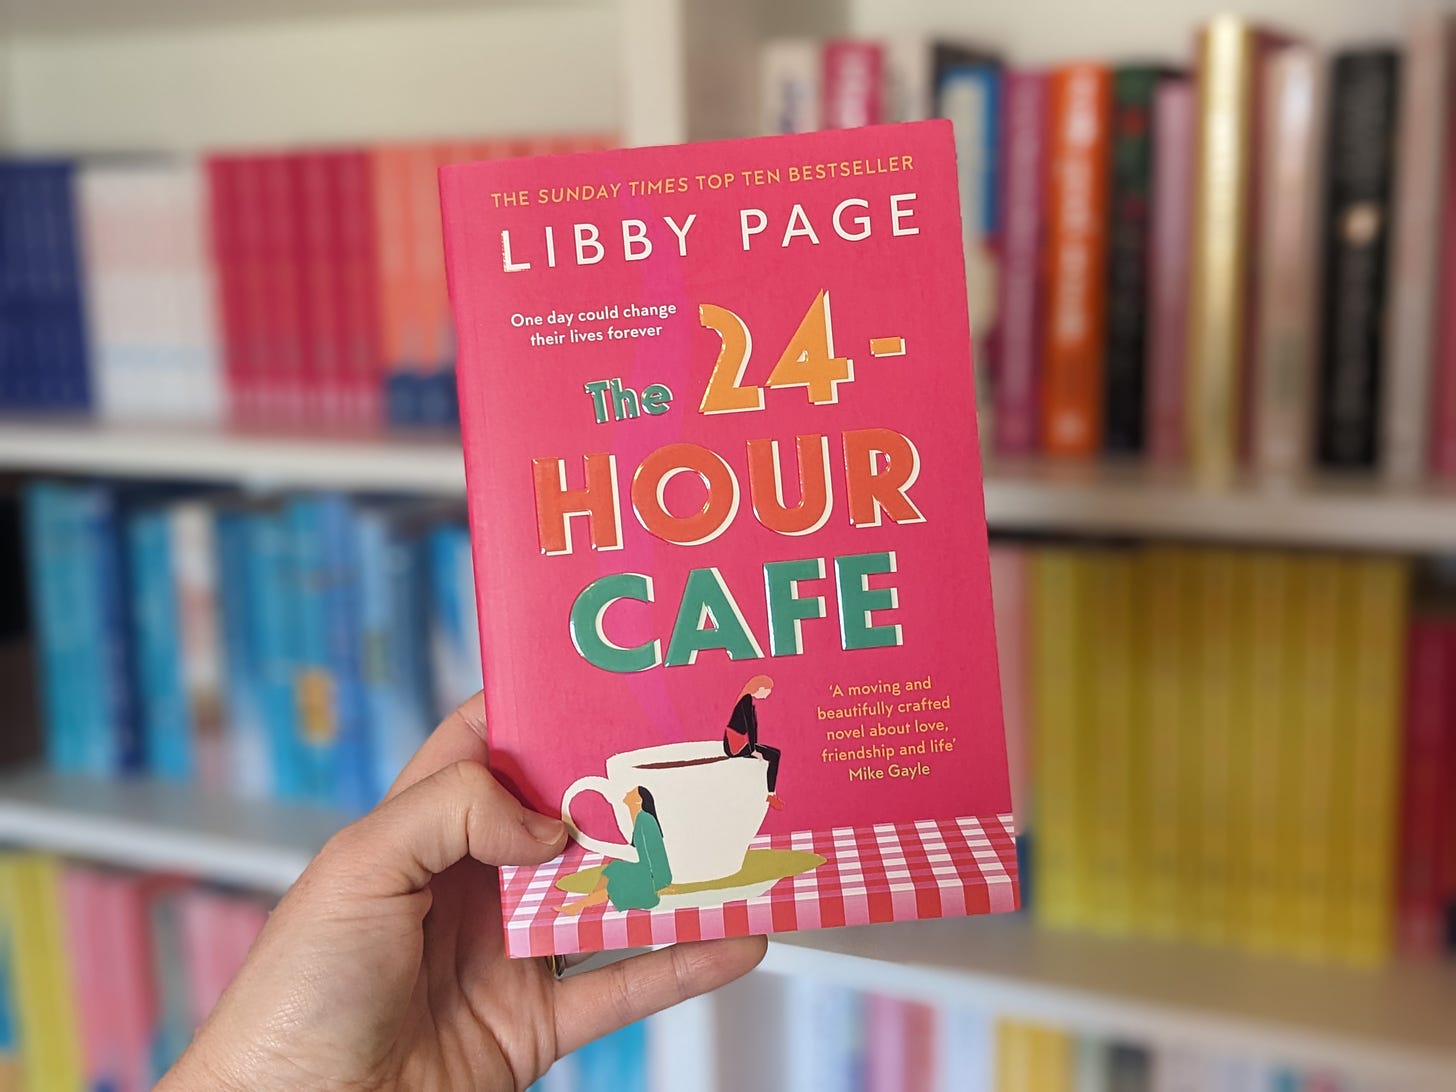 The cover for Libby Page's The 24-Hour Café is a deep pink and shows two women turned away from each other, sat on a tea cup.